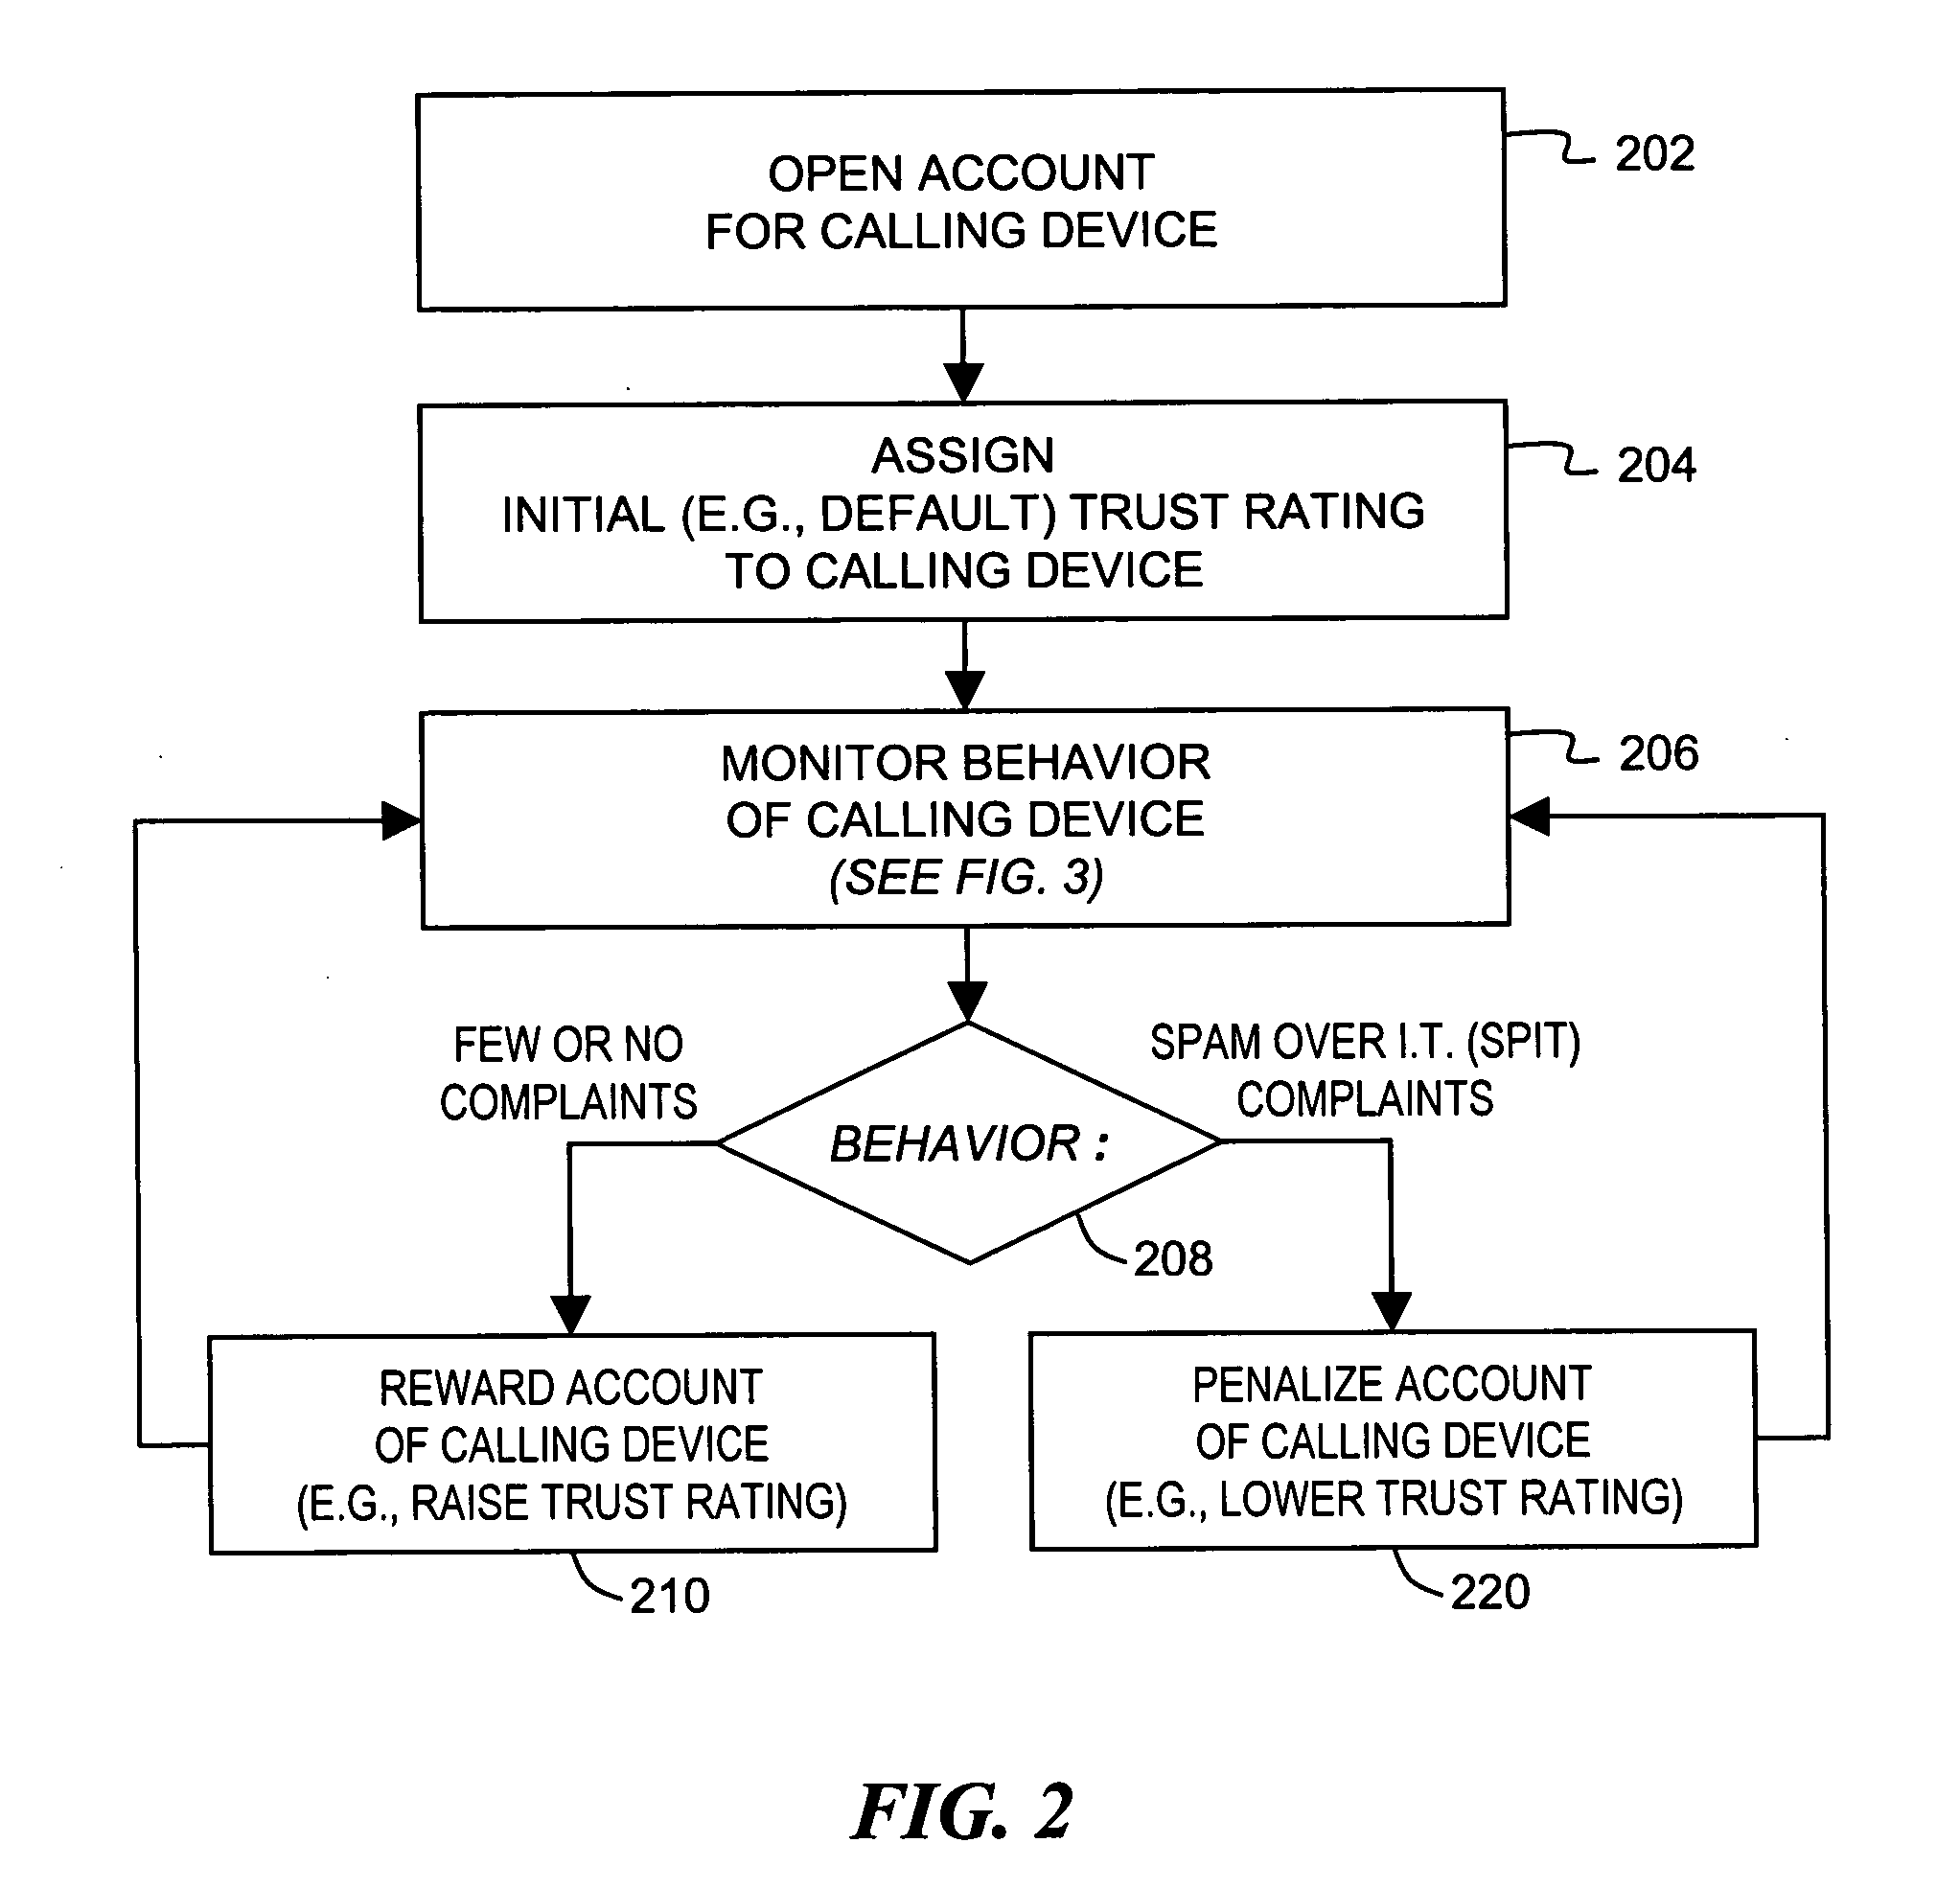 Arrangement for managing voice over IP (VoIP) telephone calls, especially unsolicited or unwanted calls